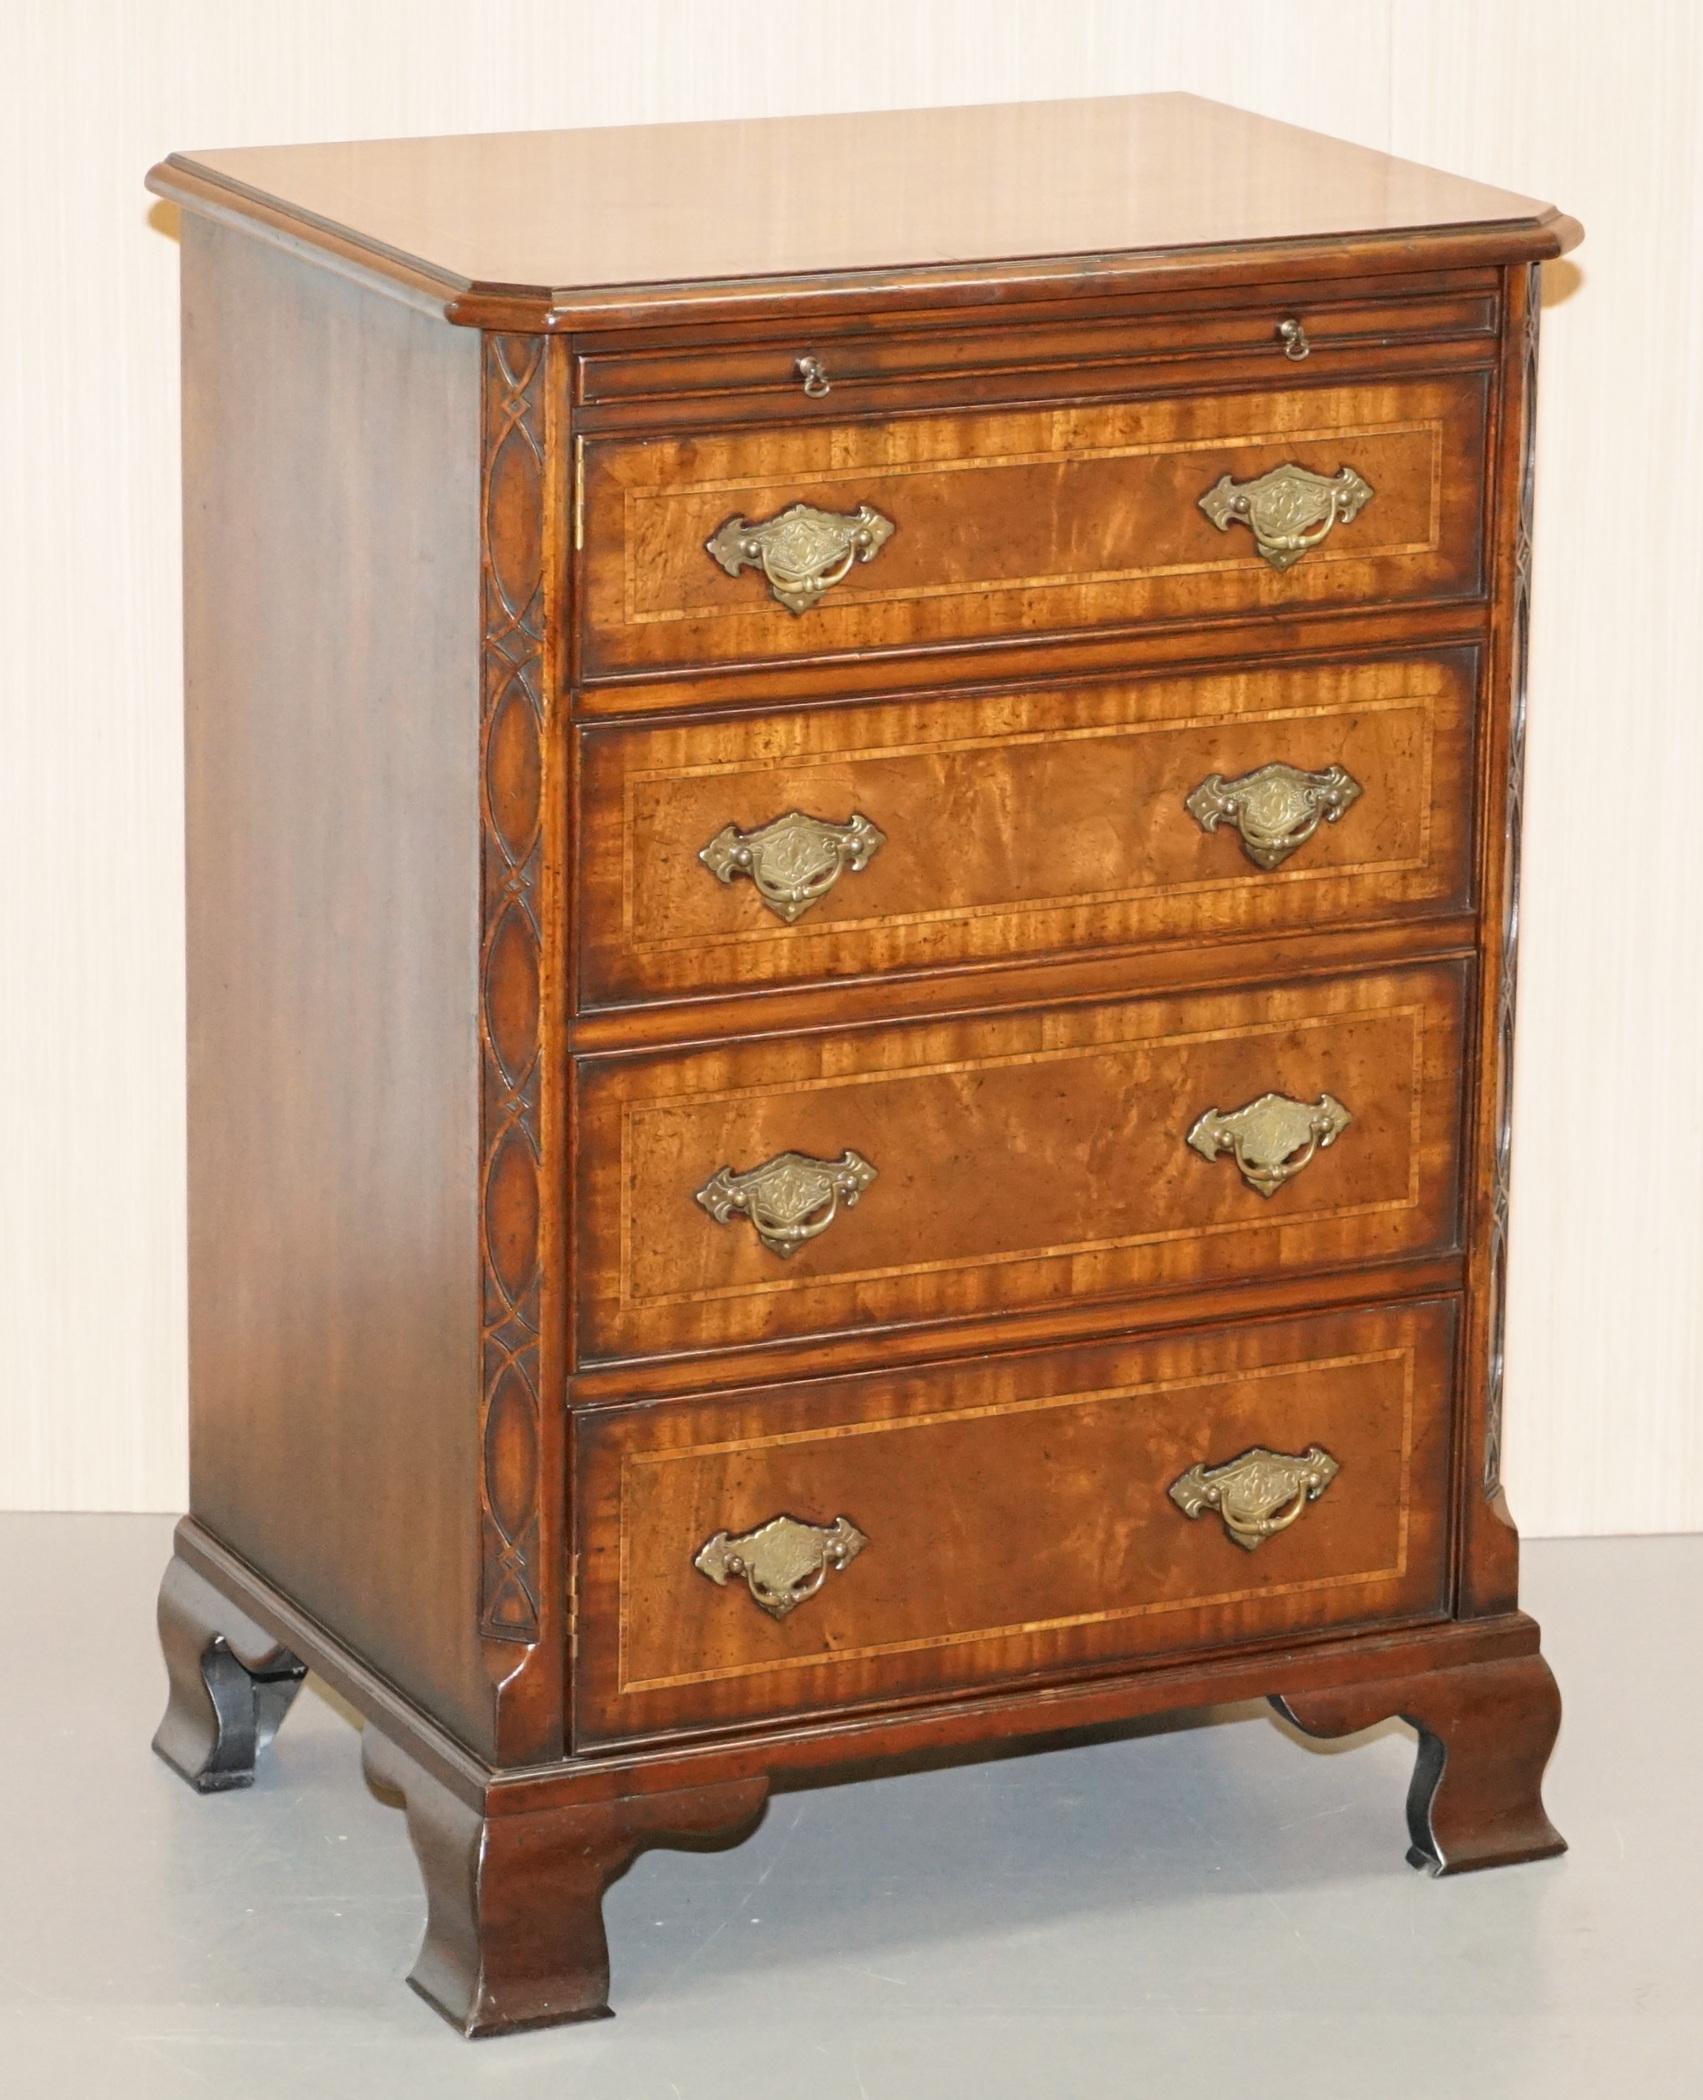 We are delighted to offer for sale this lovely Record Player cupboard which is hidden as a Regency style chest of drawers in solid flamed mahogany 

A very well made and decorative piece of metamorphic furniture, the top rises to reveal a space to